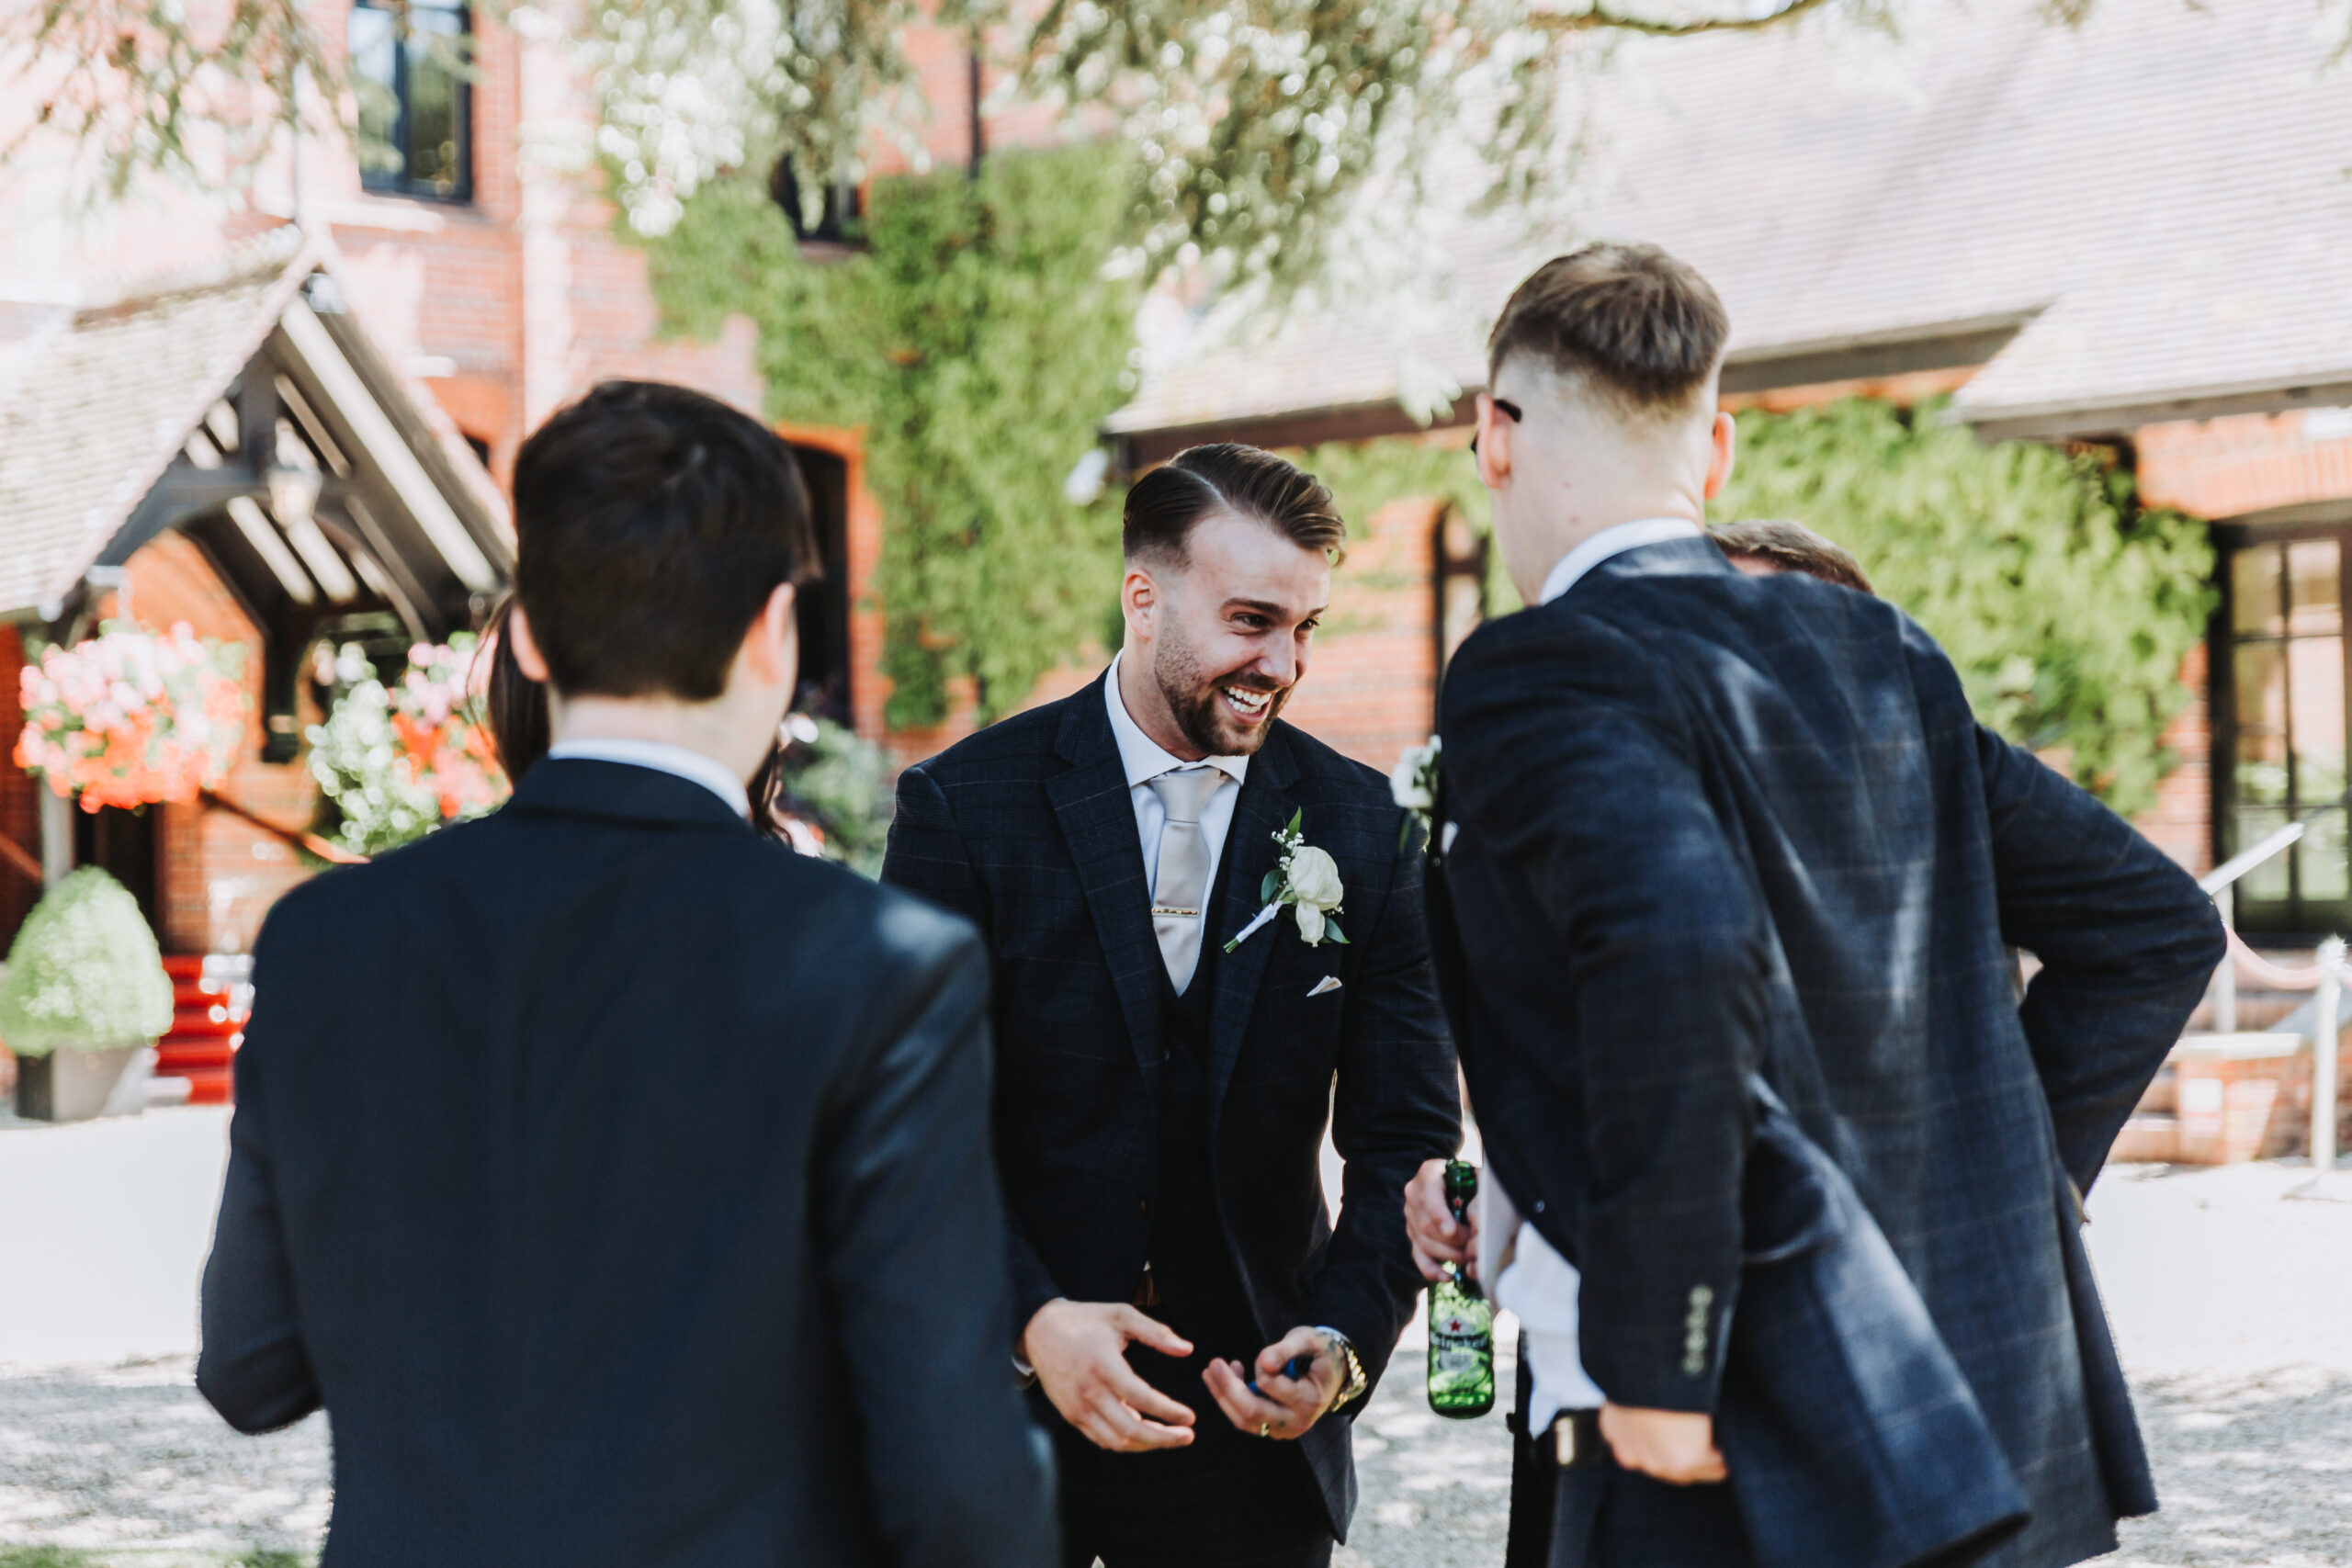 groom laughing with guests